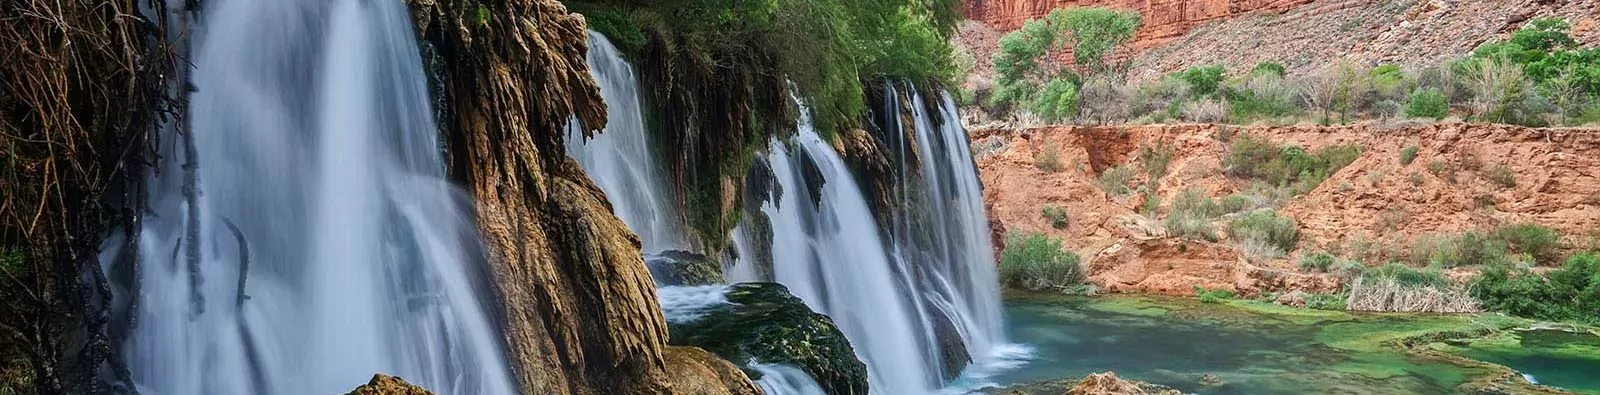 Fifty Foot Falls on the Havasupai Reservation